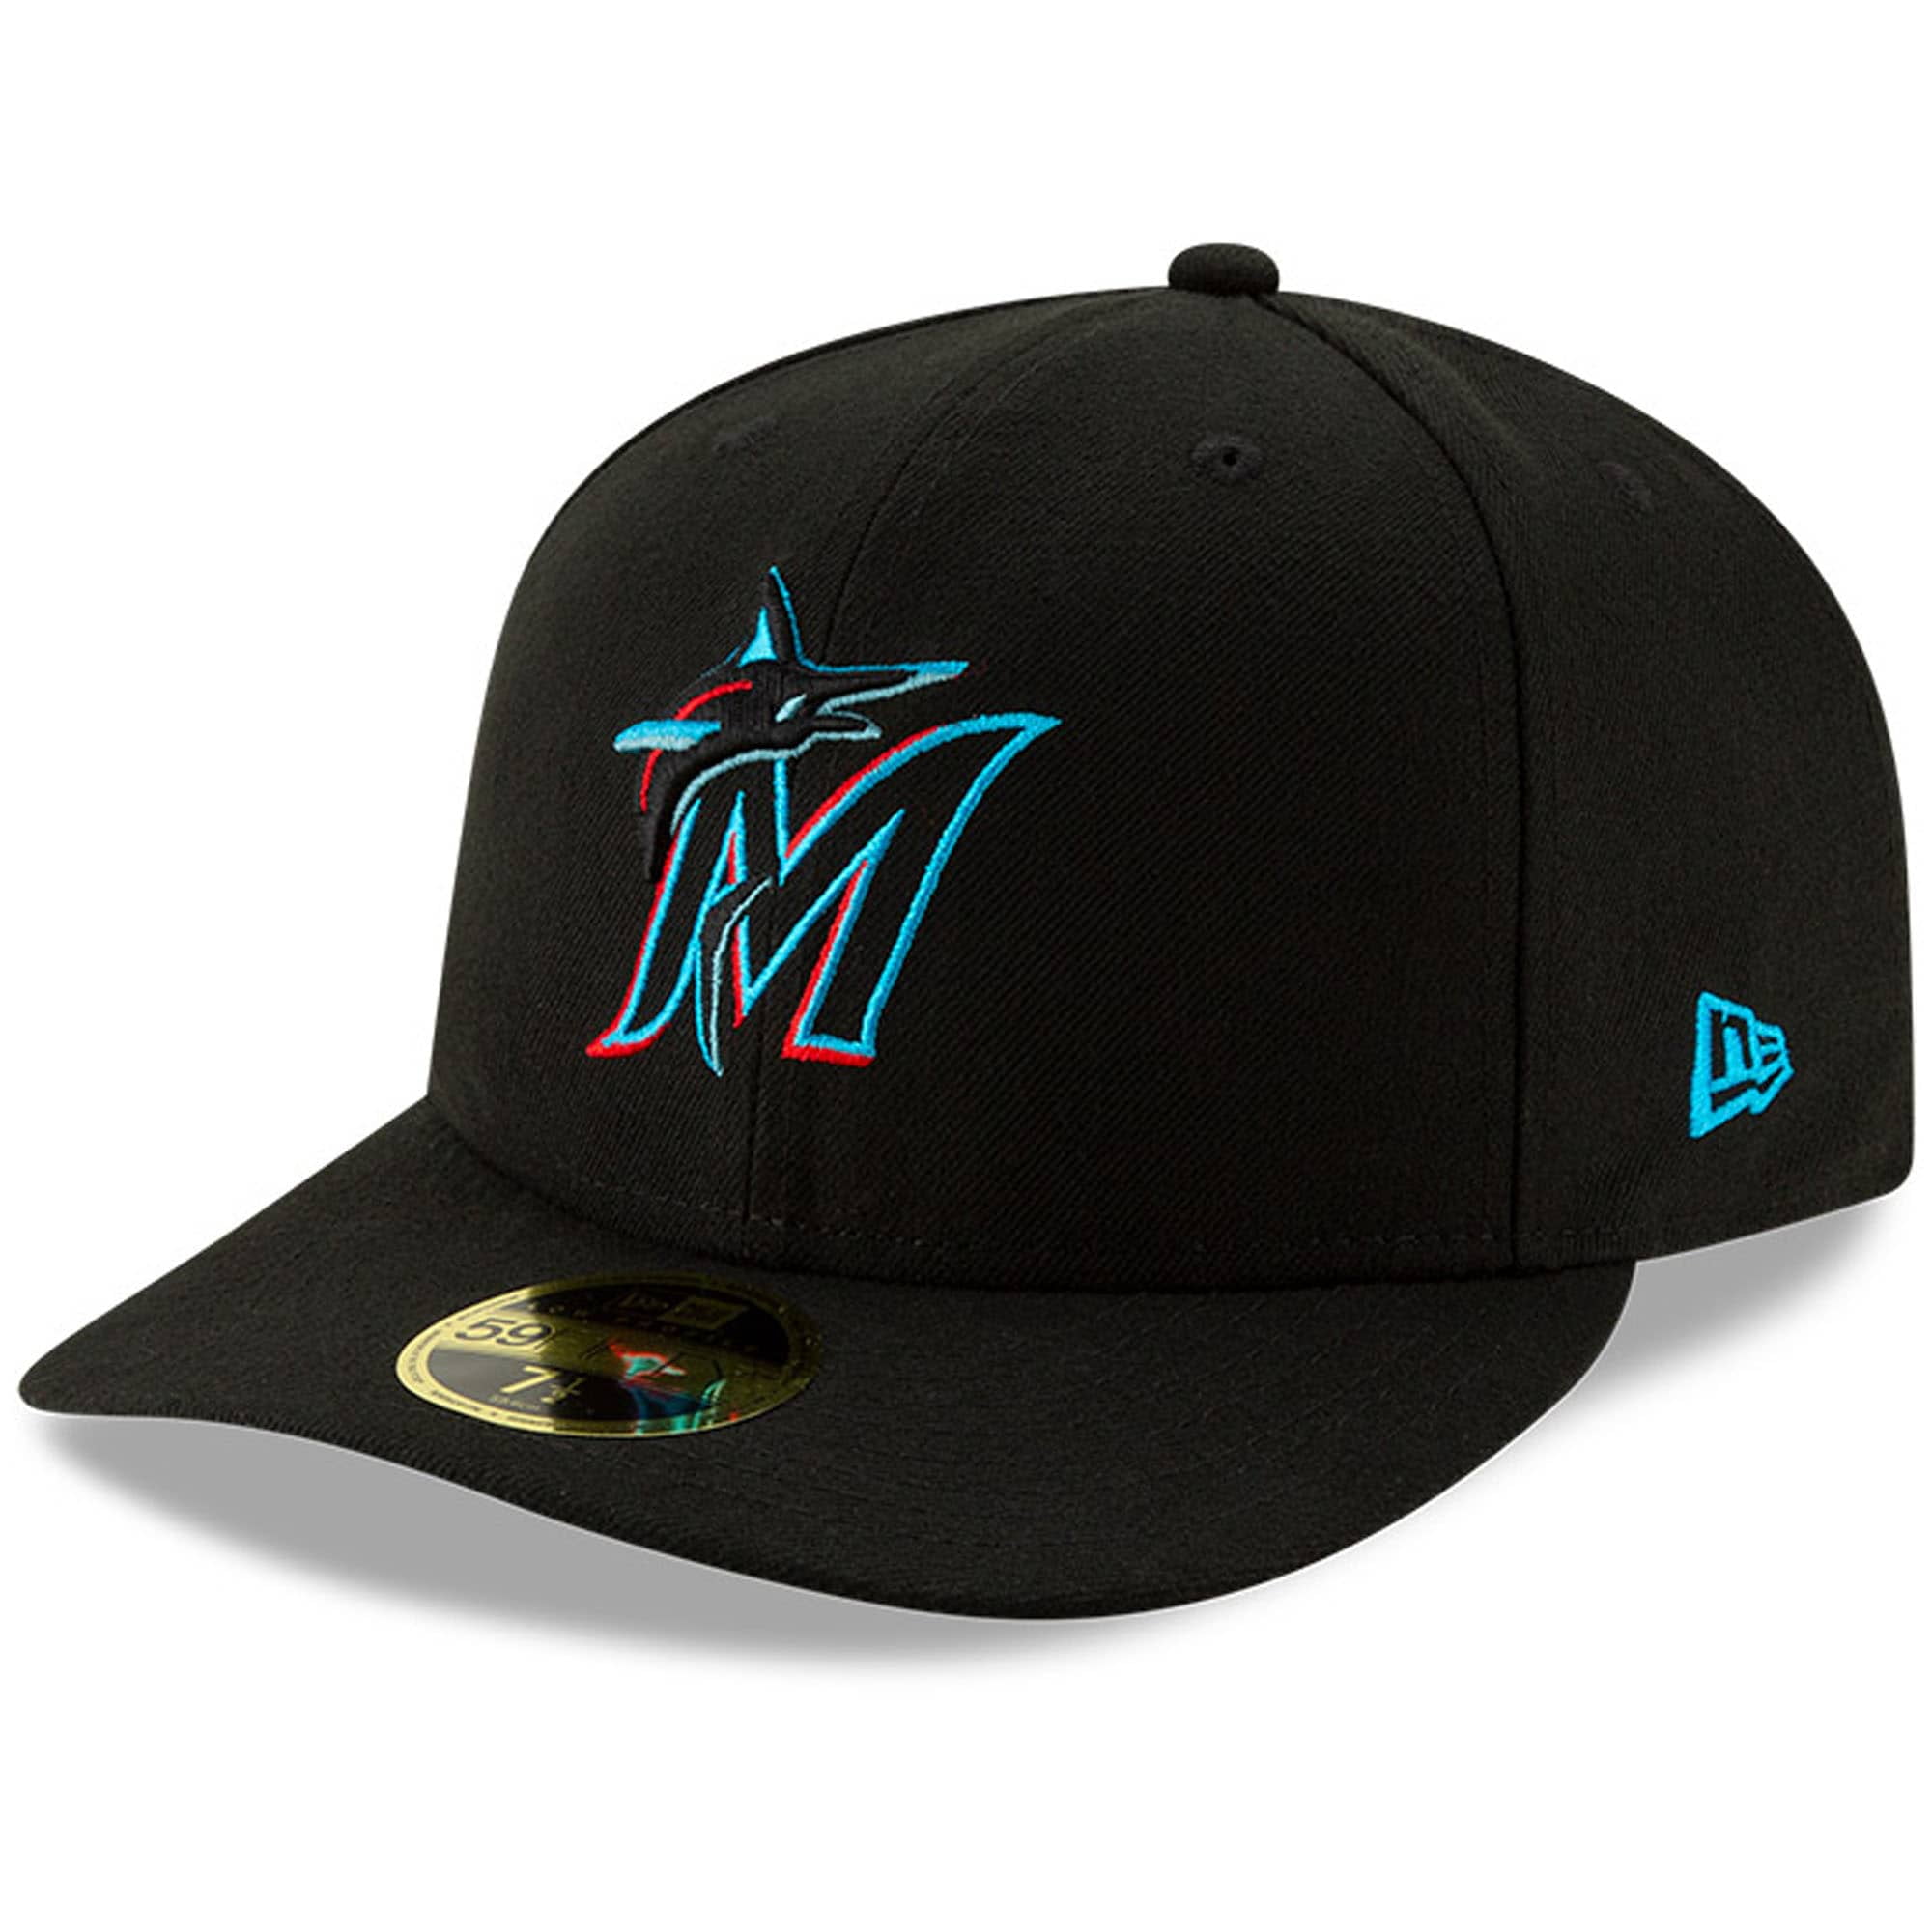 Men's New Era Black Miami Marlins Authentic Collection OnField Low